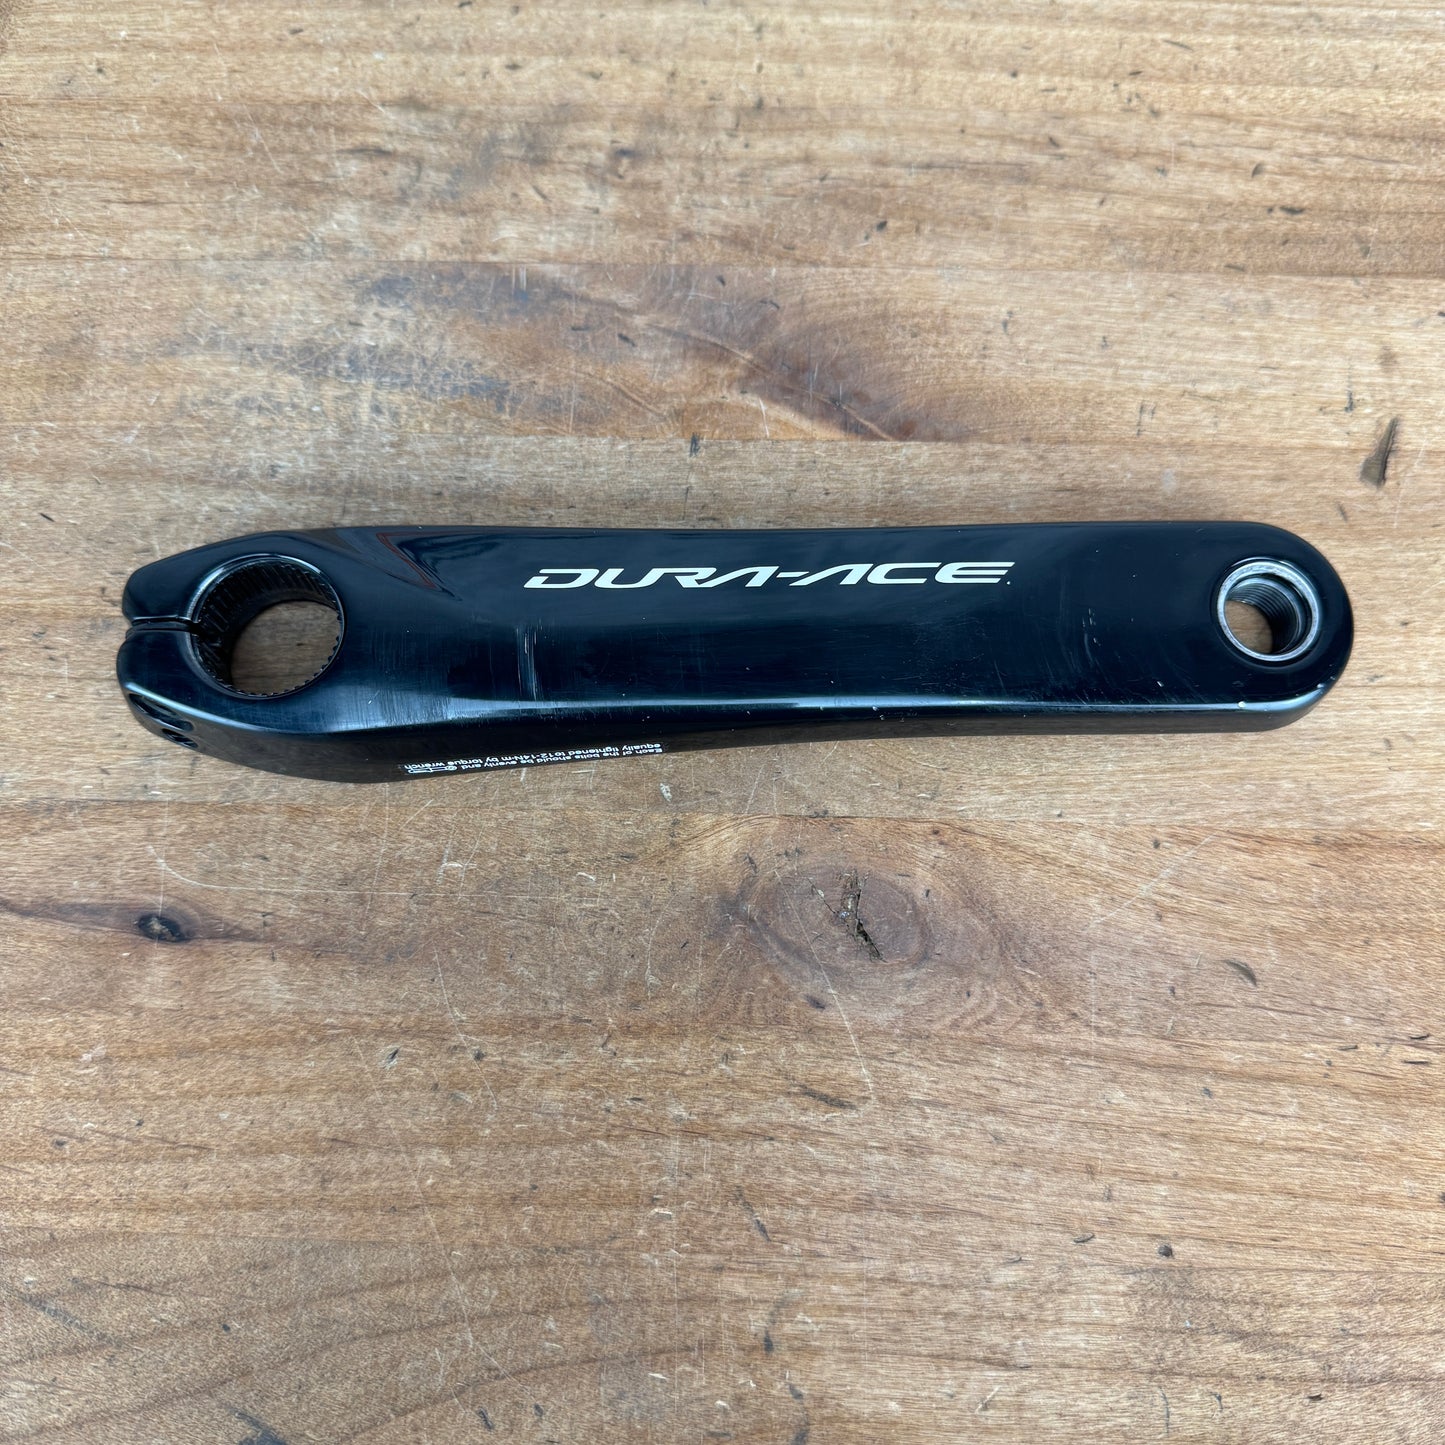 Shimano Dura-Ace FC-R9100 172.5mm Left Side Crank Arm Passed Recall